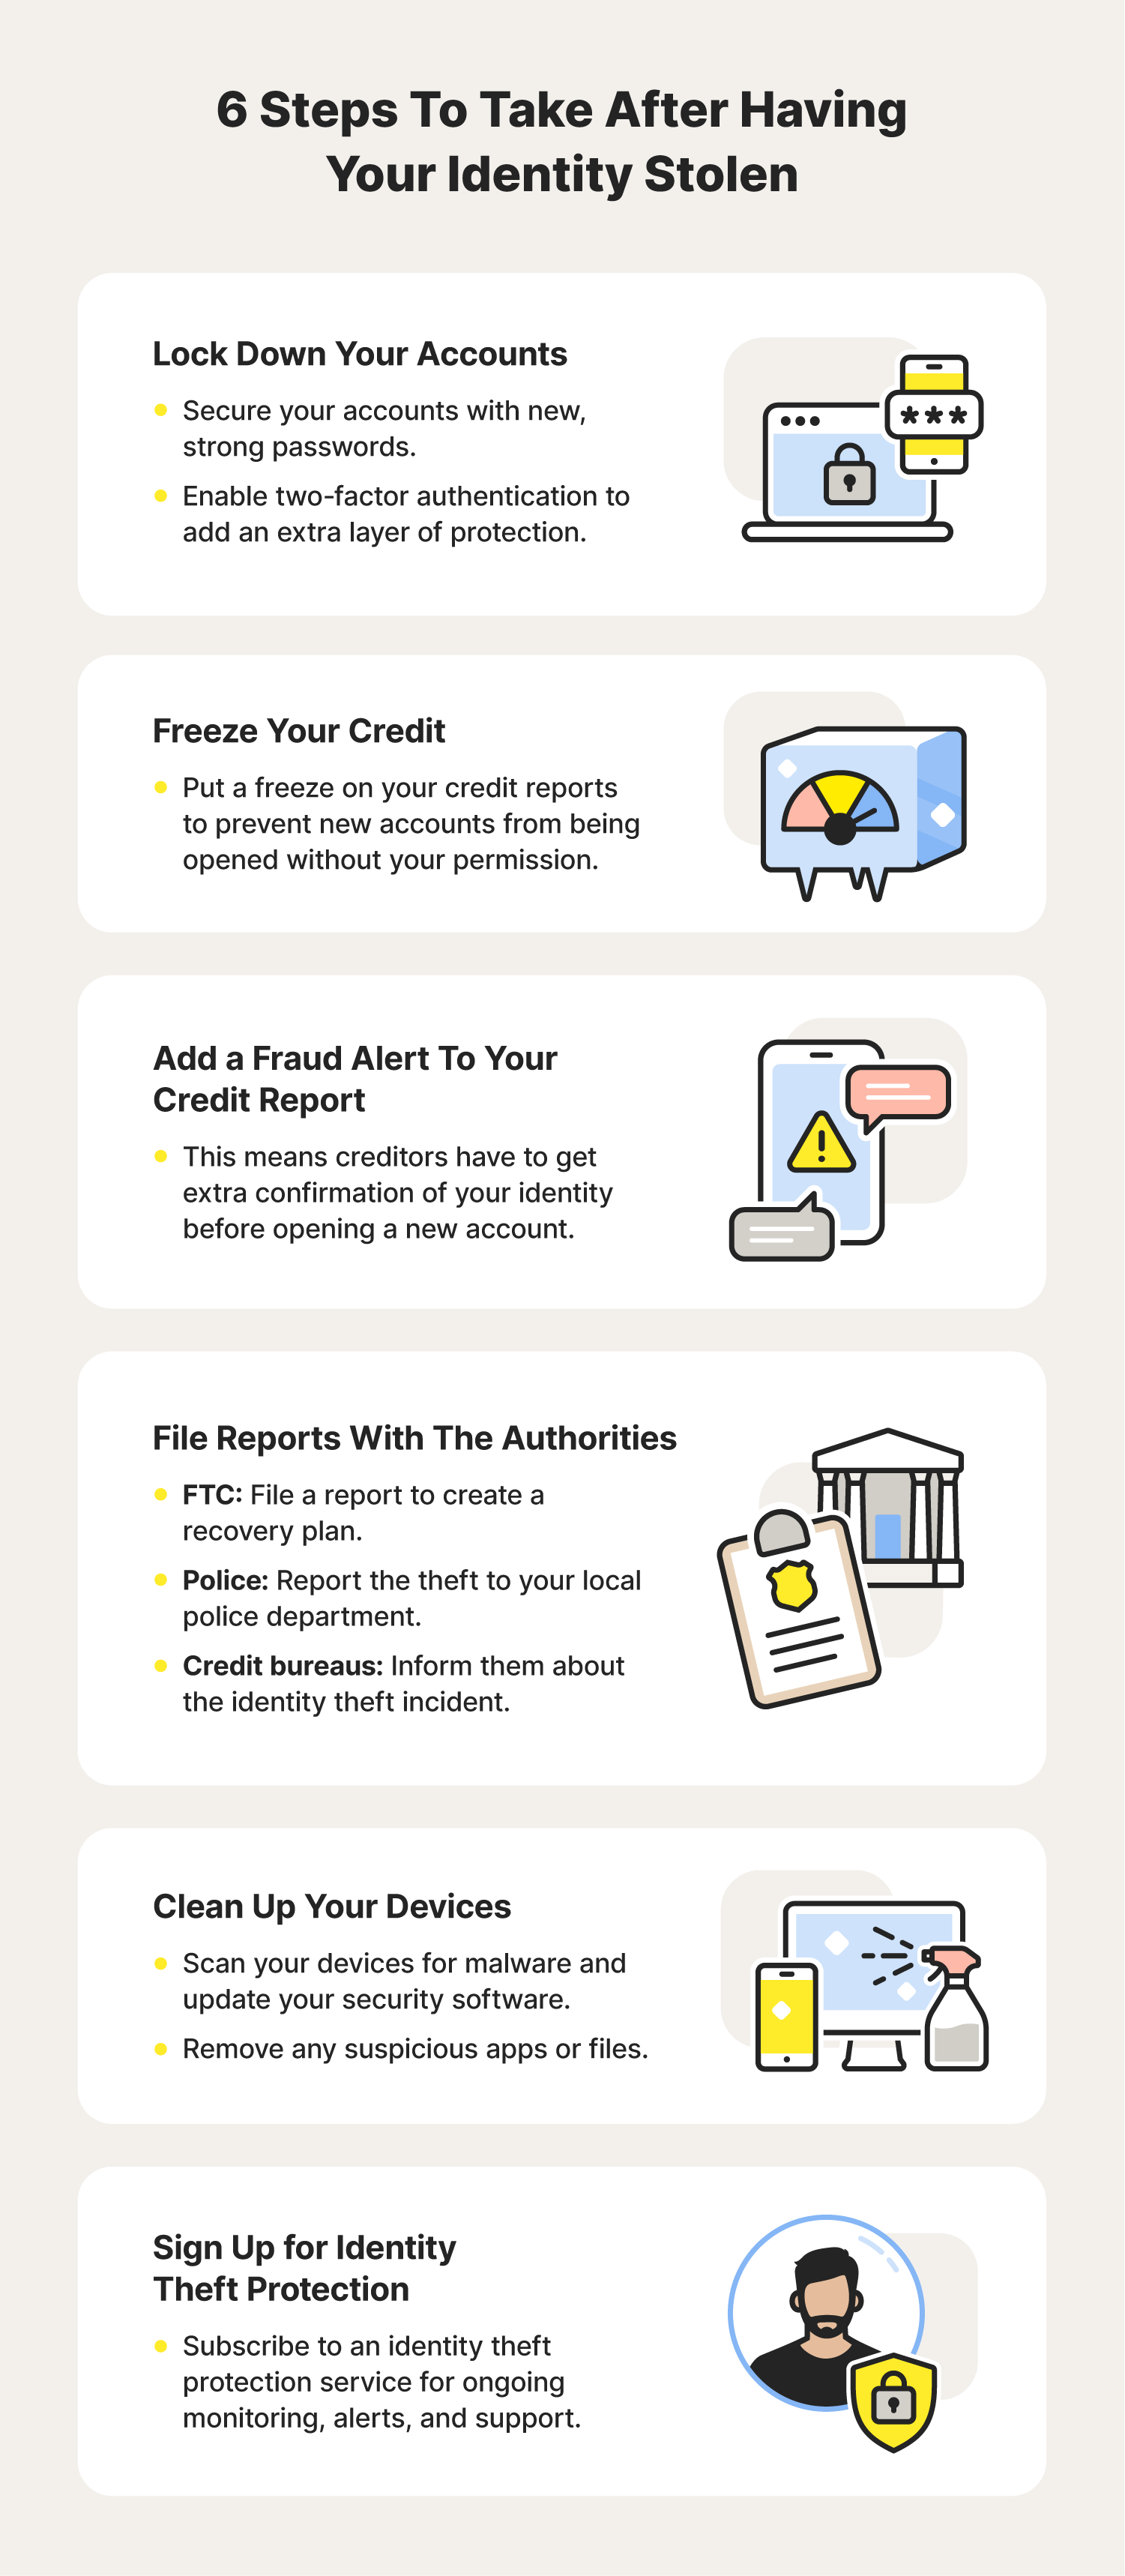 Infographic with 6 steps to take after your identity is stolen that can help you prevent further damage and reduce future theft.